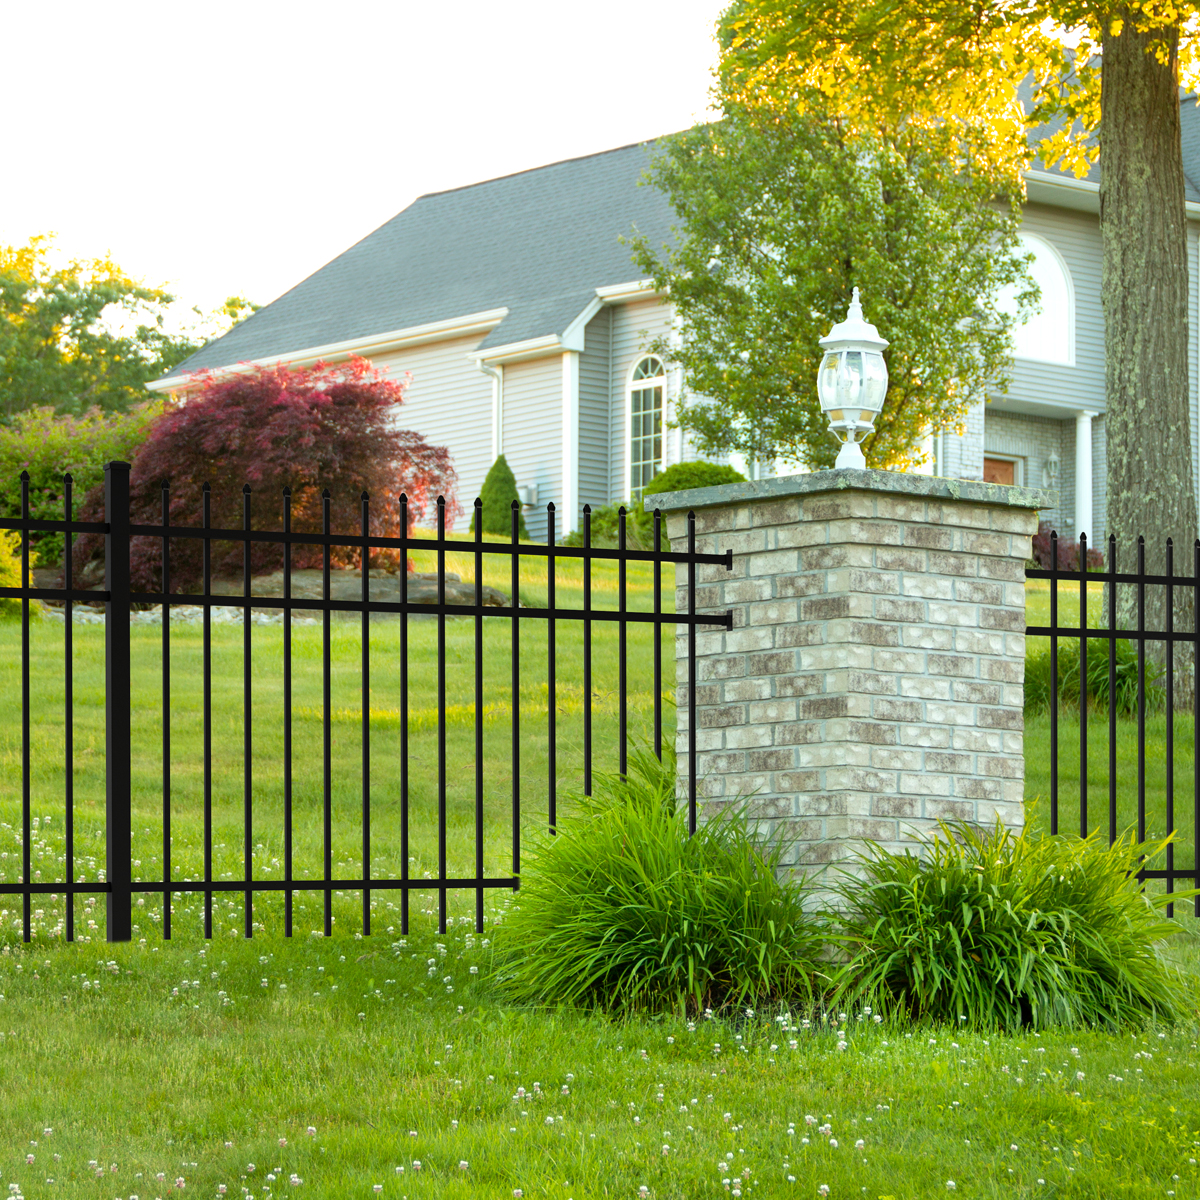 Ironcraft Fences, Residential Fencing, Aluminum Fence Systems